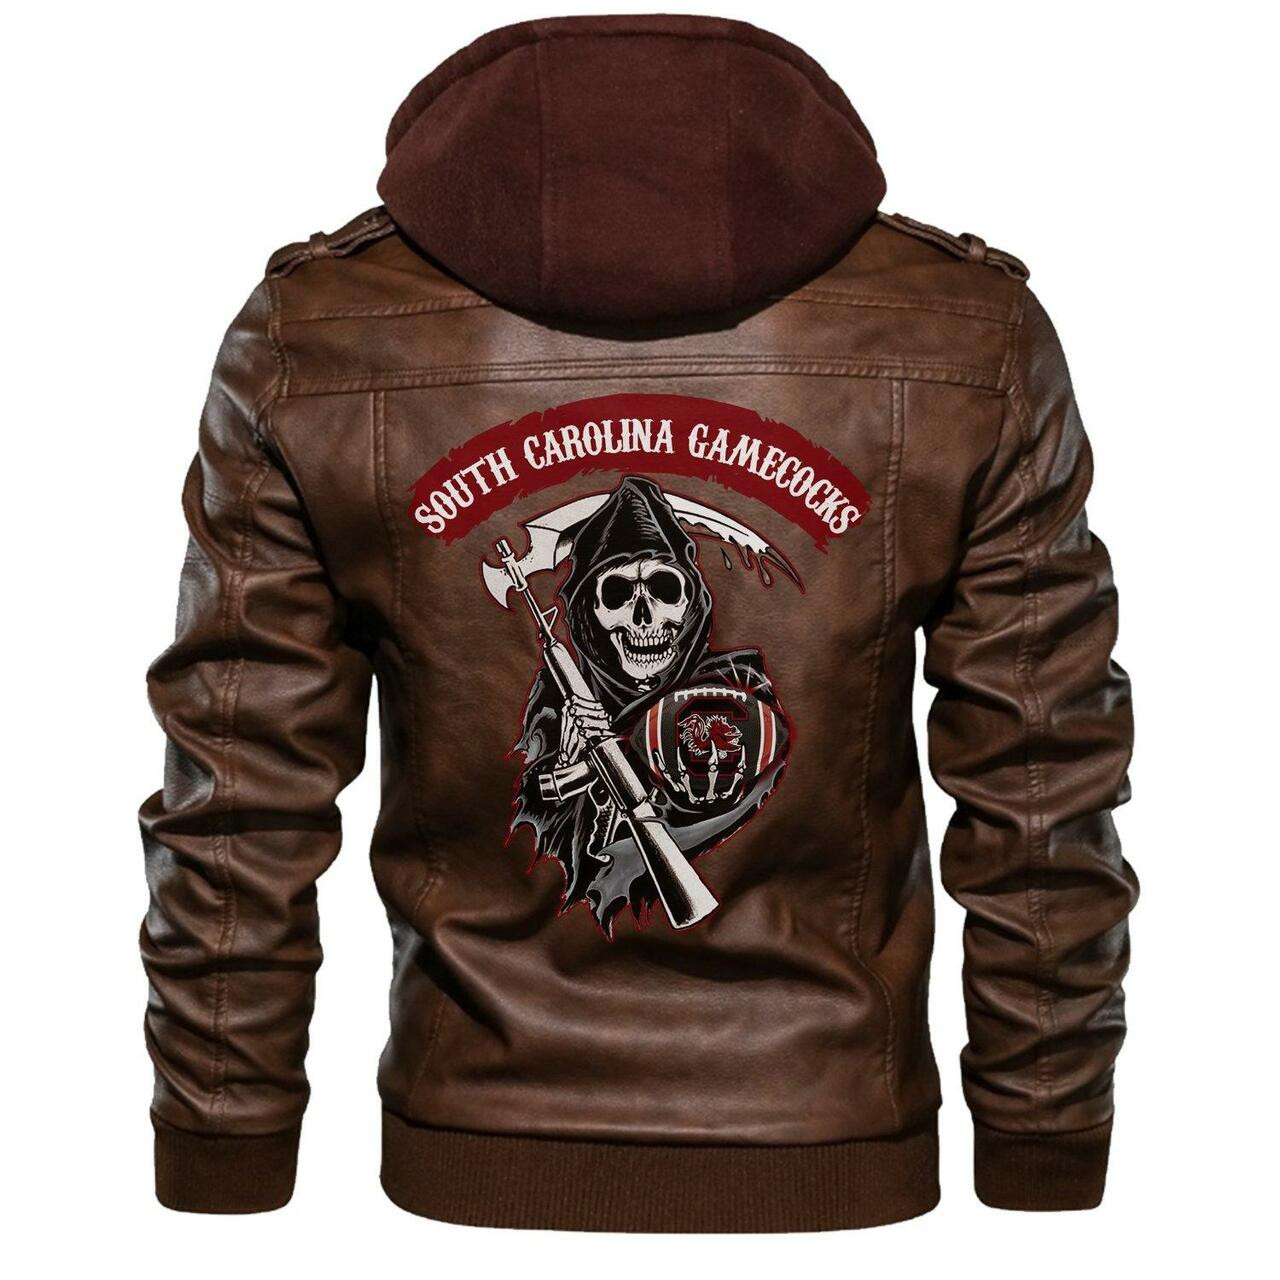 Don't wait another minute, Get Hot Leather Jacket today 54